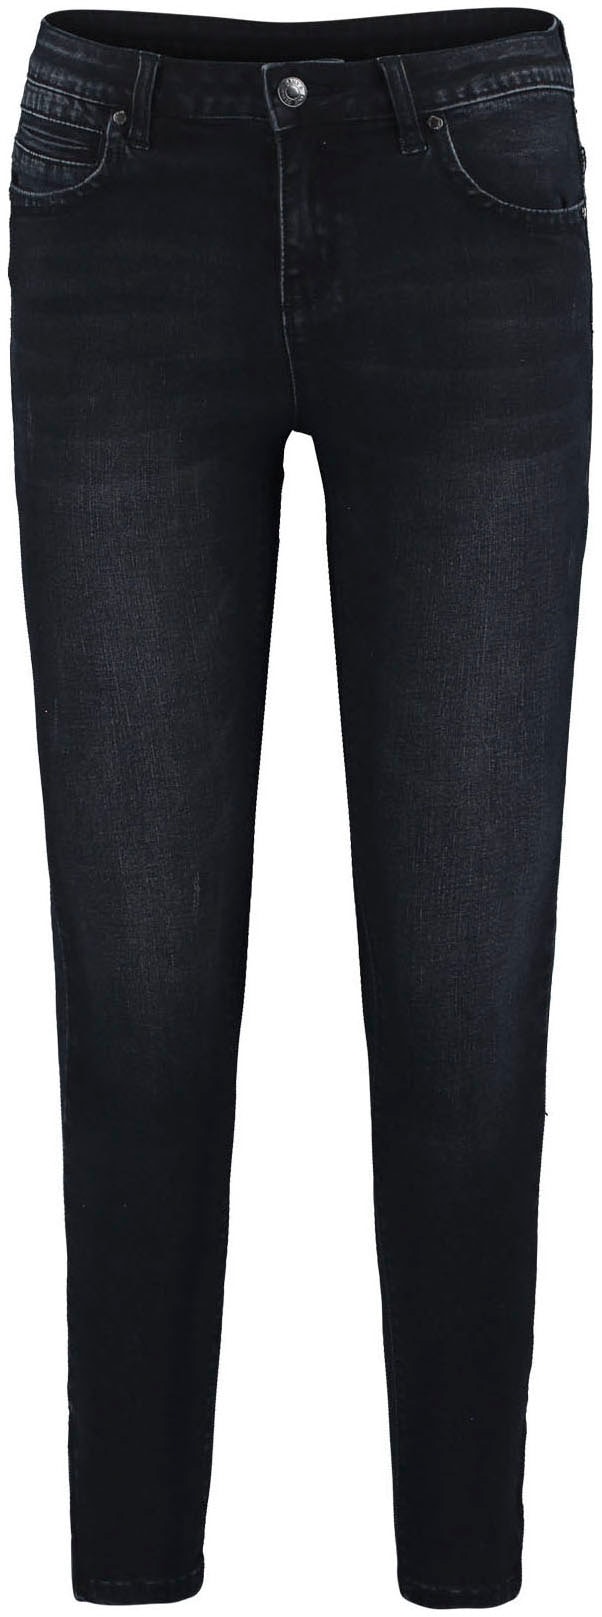 HaILY’S Skinny-fit-Jeans von HaILY’S